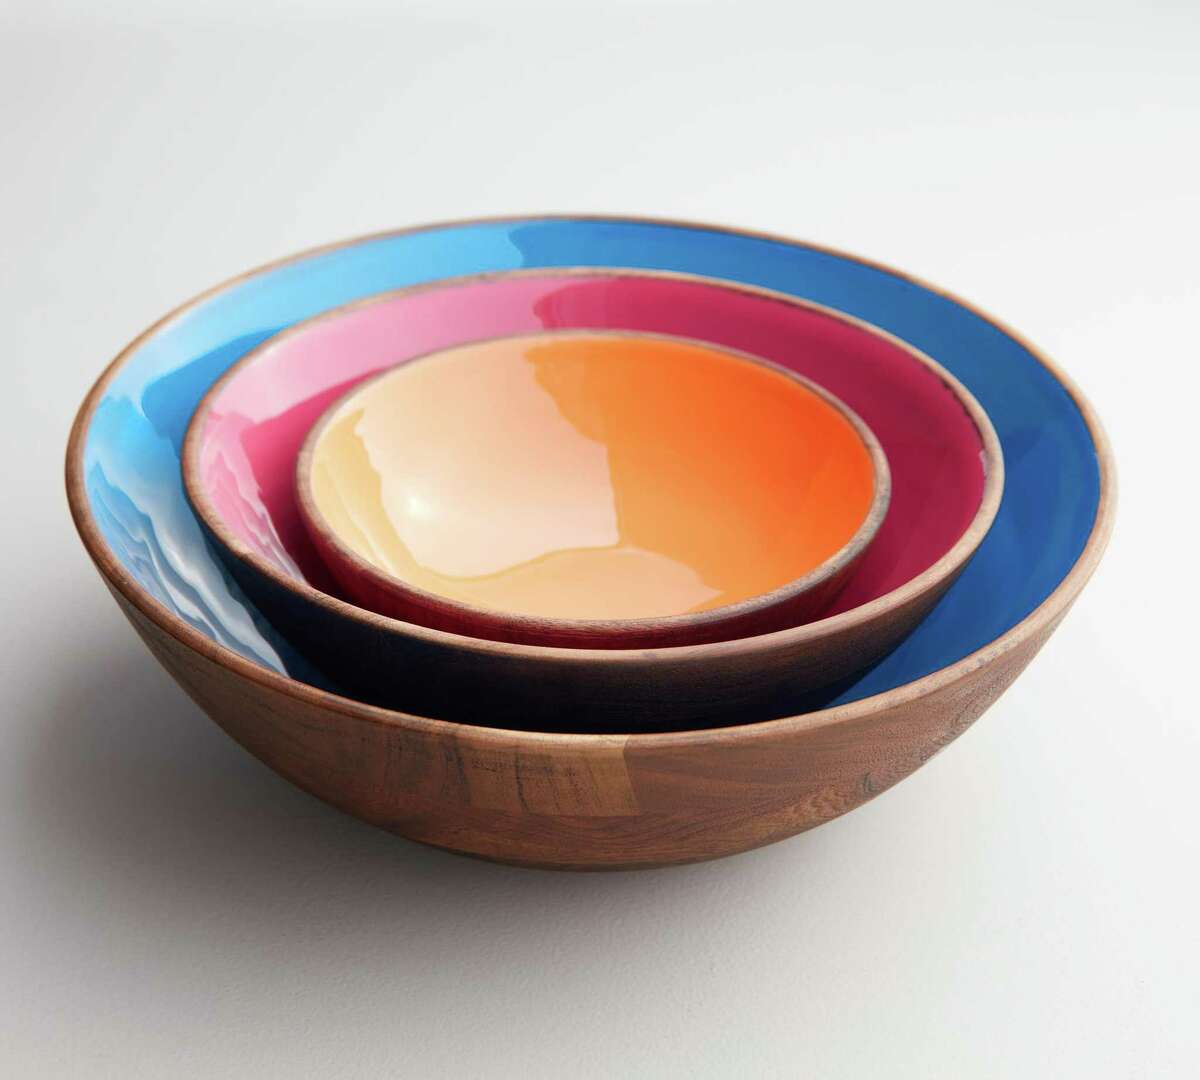 These nesting bowls are part of the new BADG x Pottery Barn collection that launched Jan. 28.